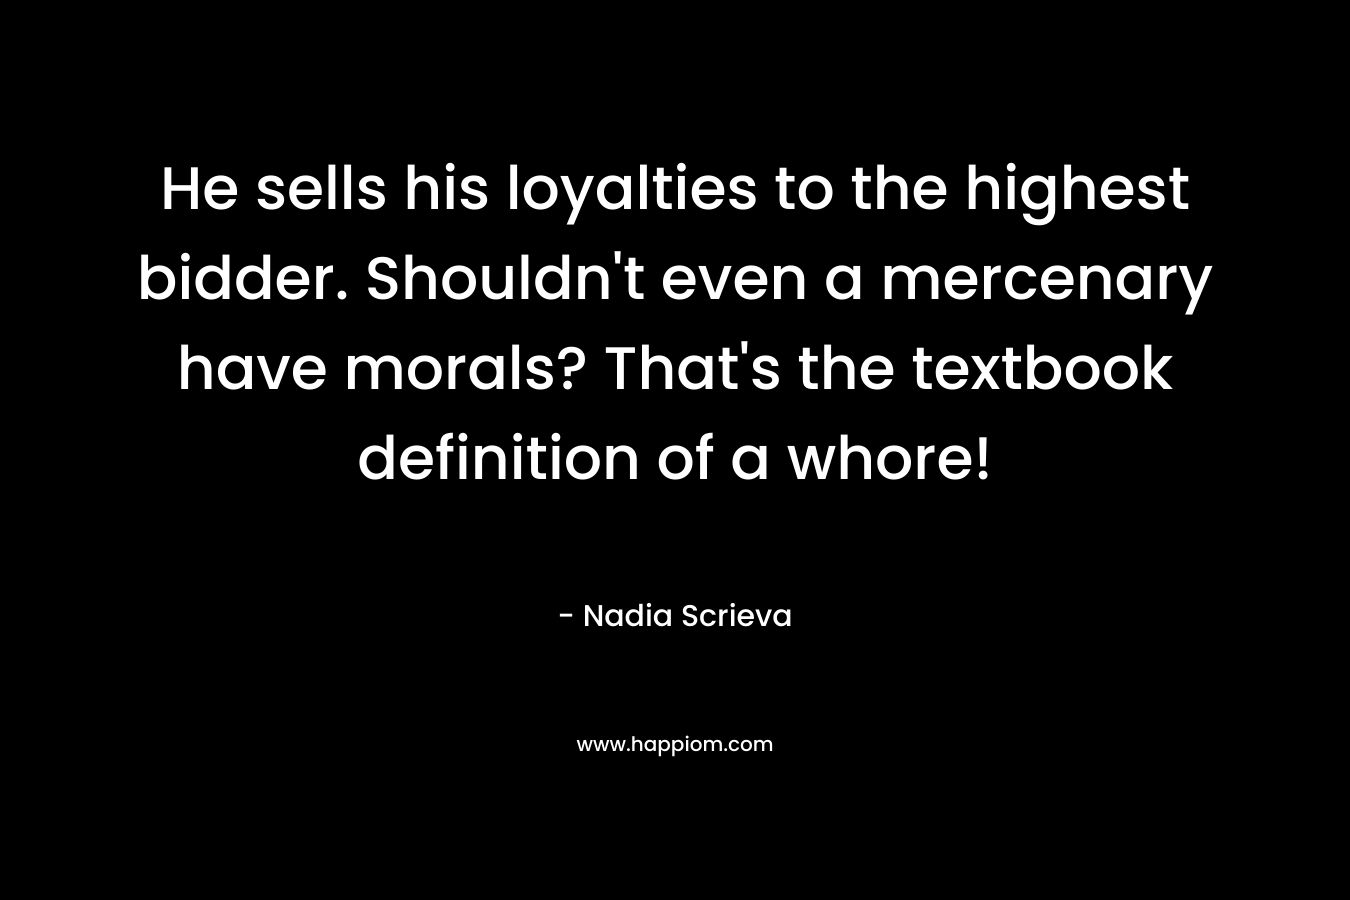 He sells his loyalties to the highest bidder. Shouldn't even a mercenary have morals? That's the textbook definition of a whore!